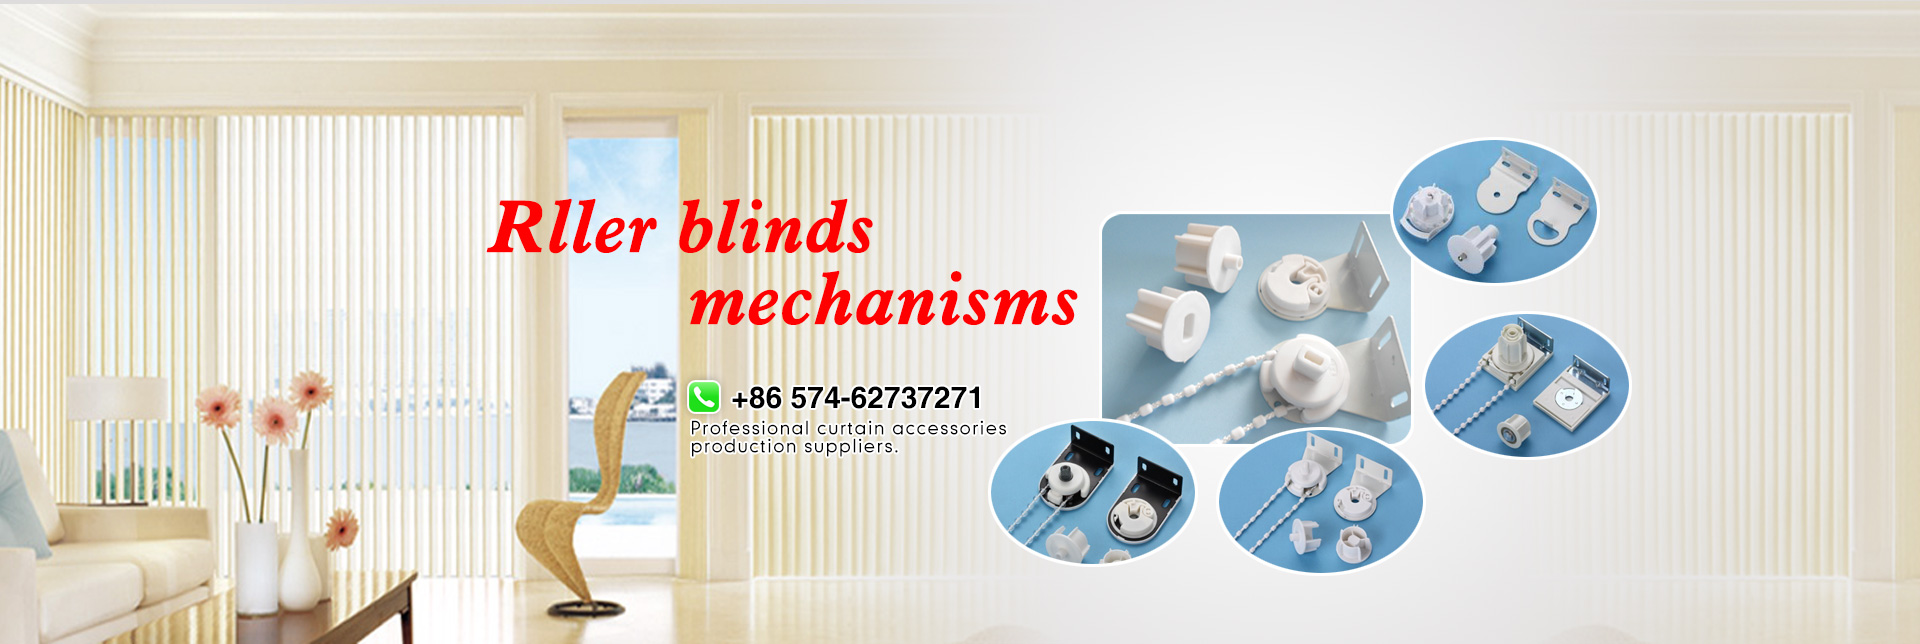 Rolling curtain accessories production suppliers